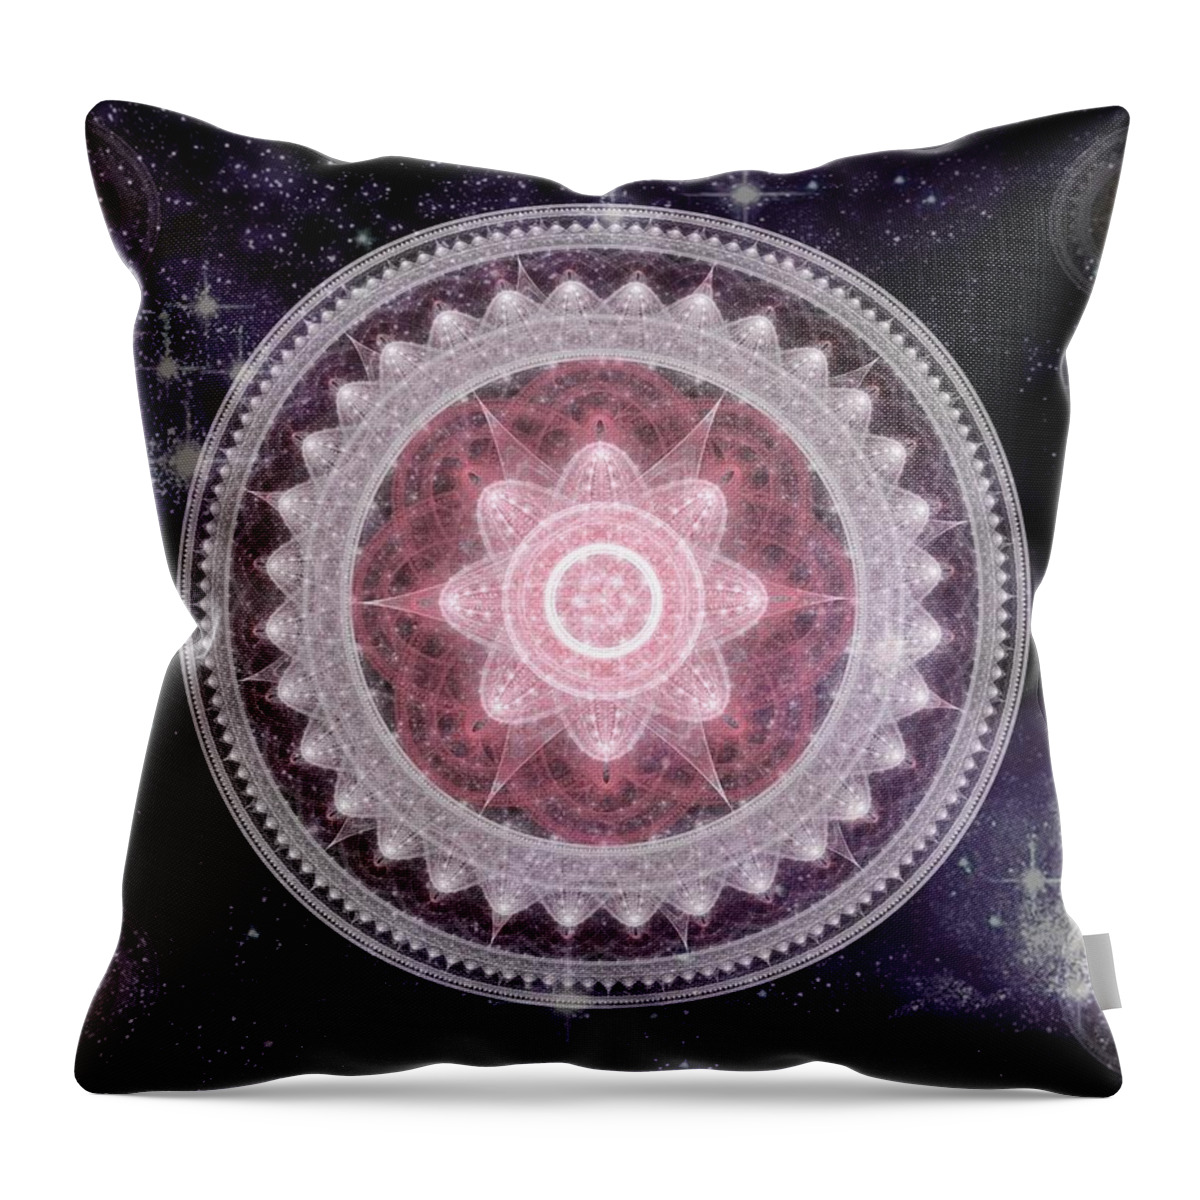 Corporate Throw Pillow featuring the digital art Cosmic Medallions Fire by Shawn Dall